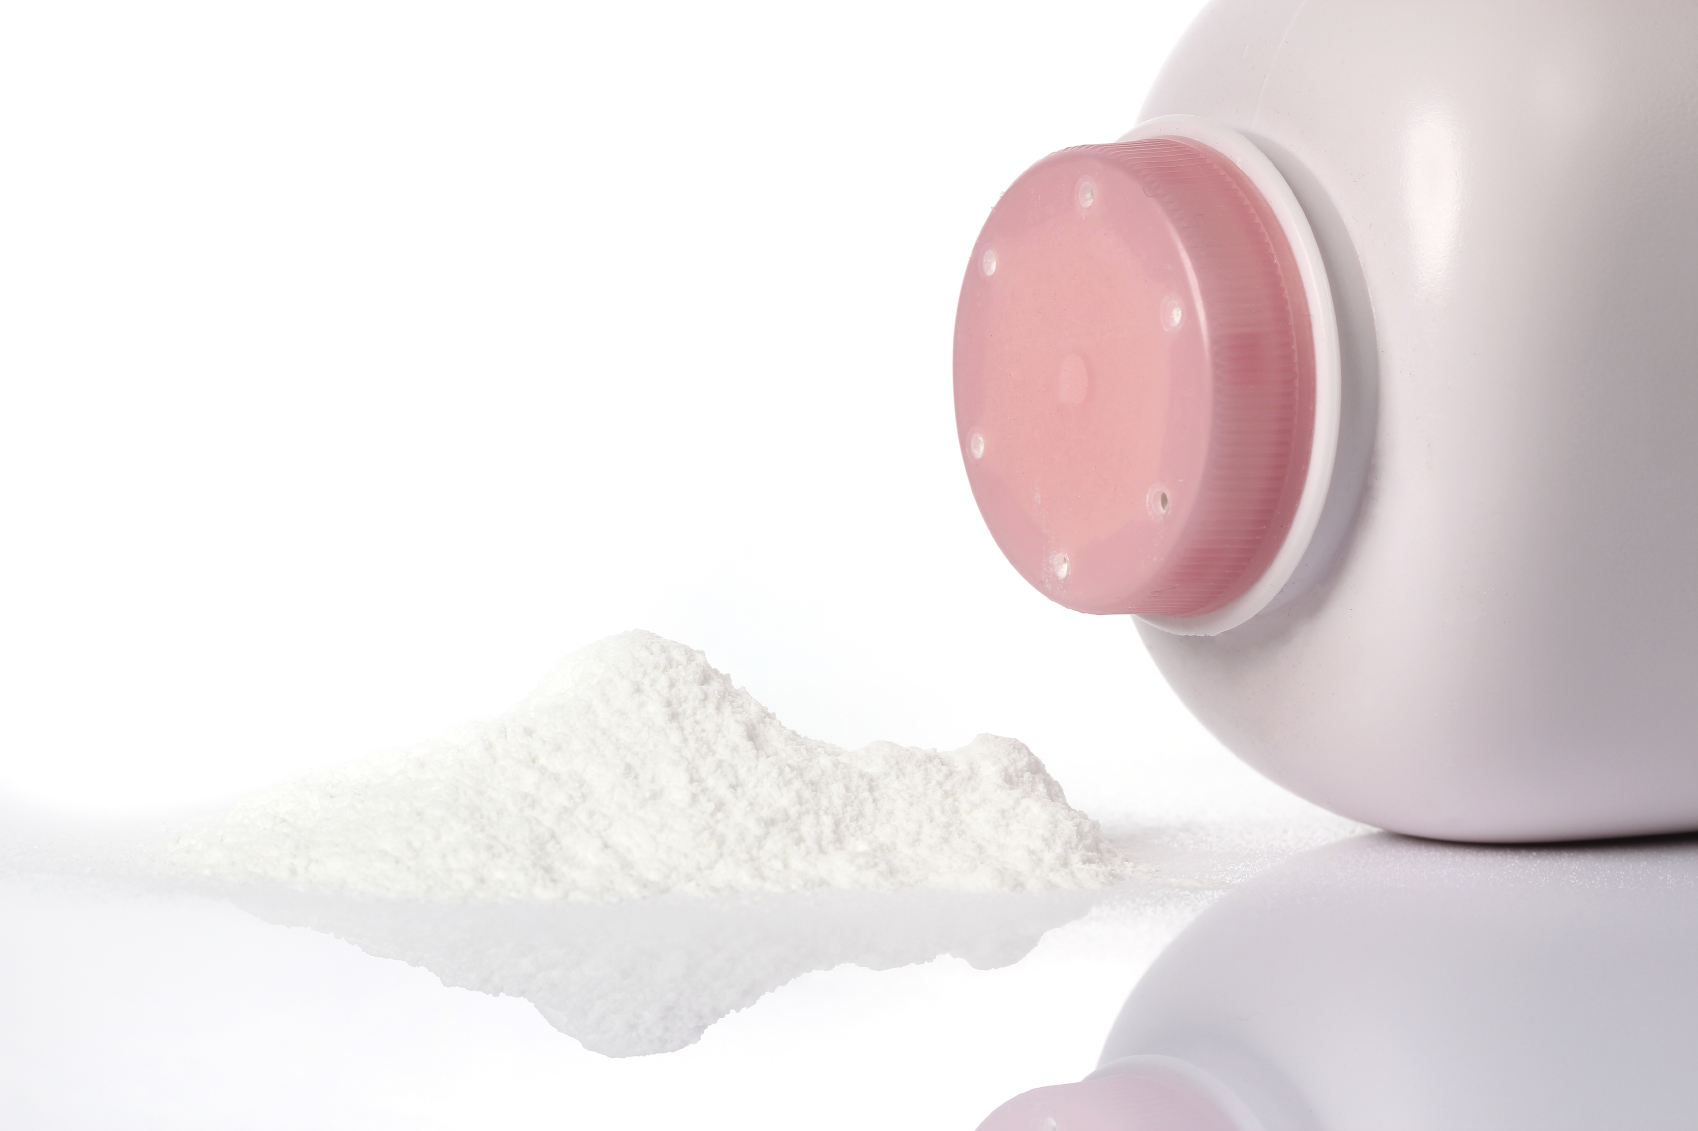 Don’t use talcum powder. Johnson’s Baby Powder and other talcum-based products are tied to ovarian cancer. Instead, try these three safe alternatives.